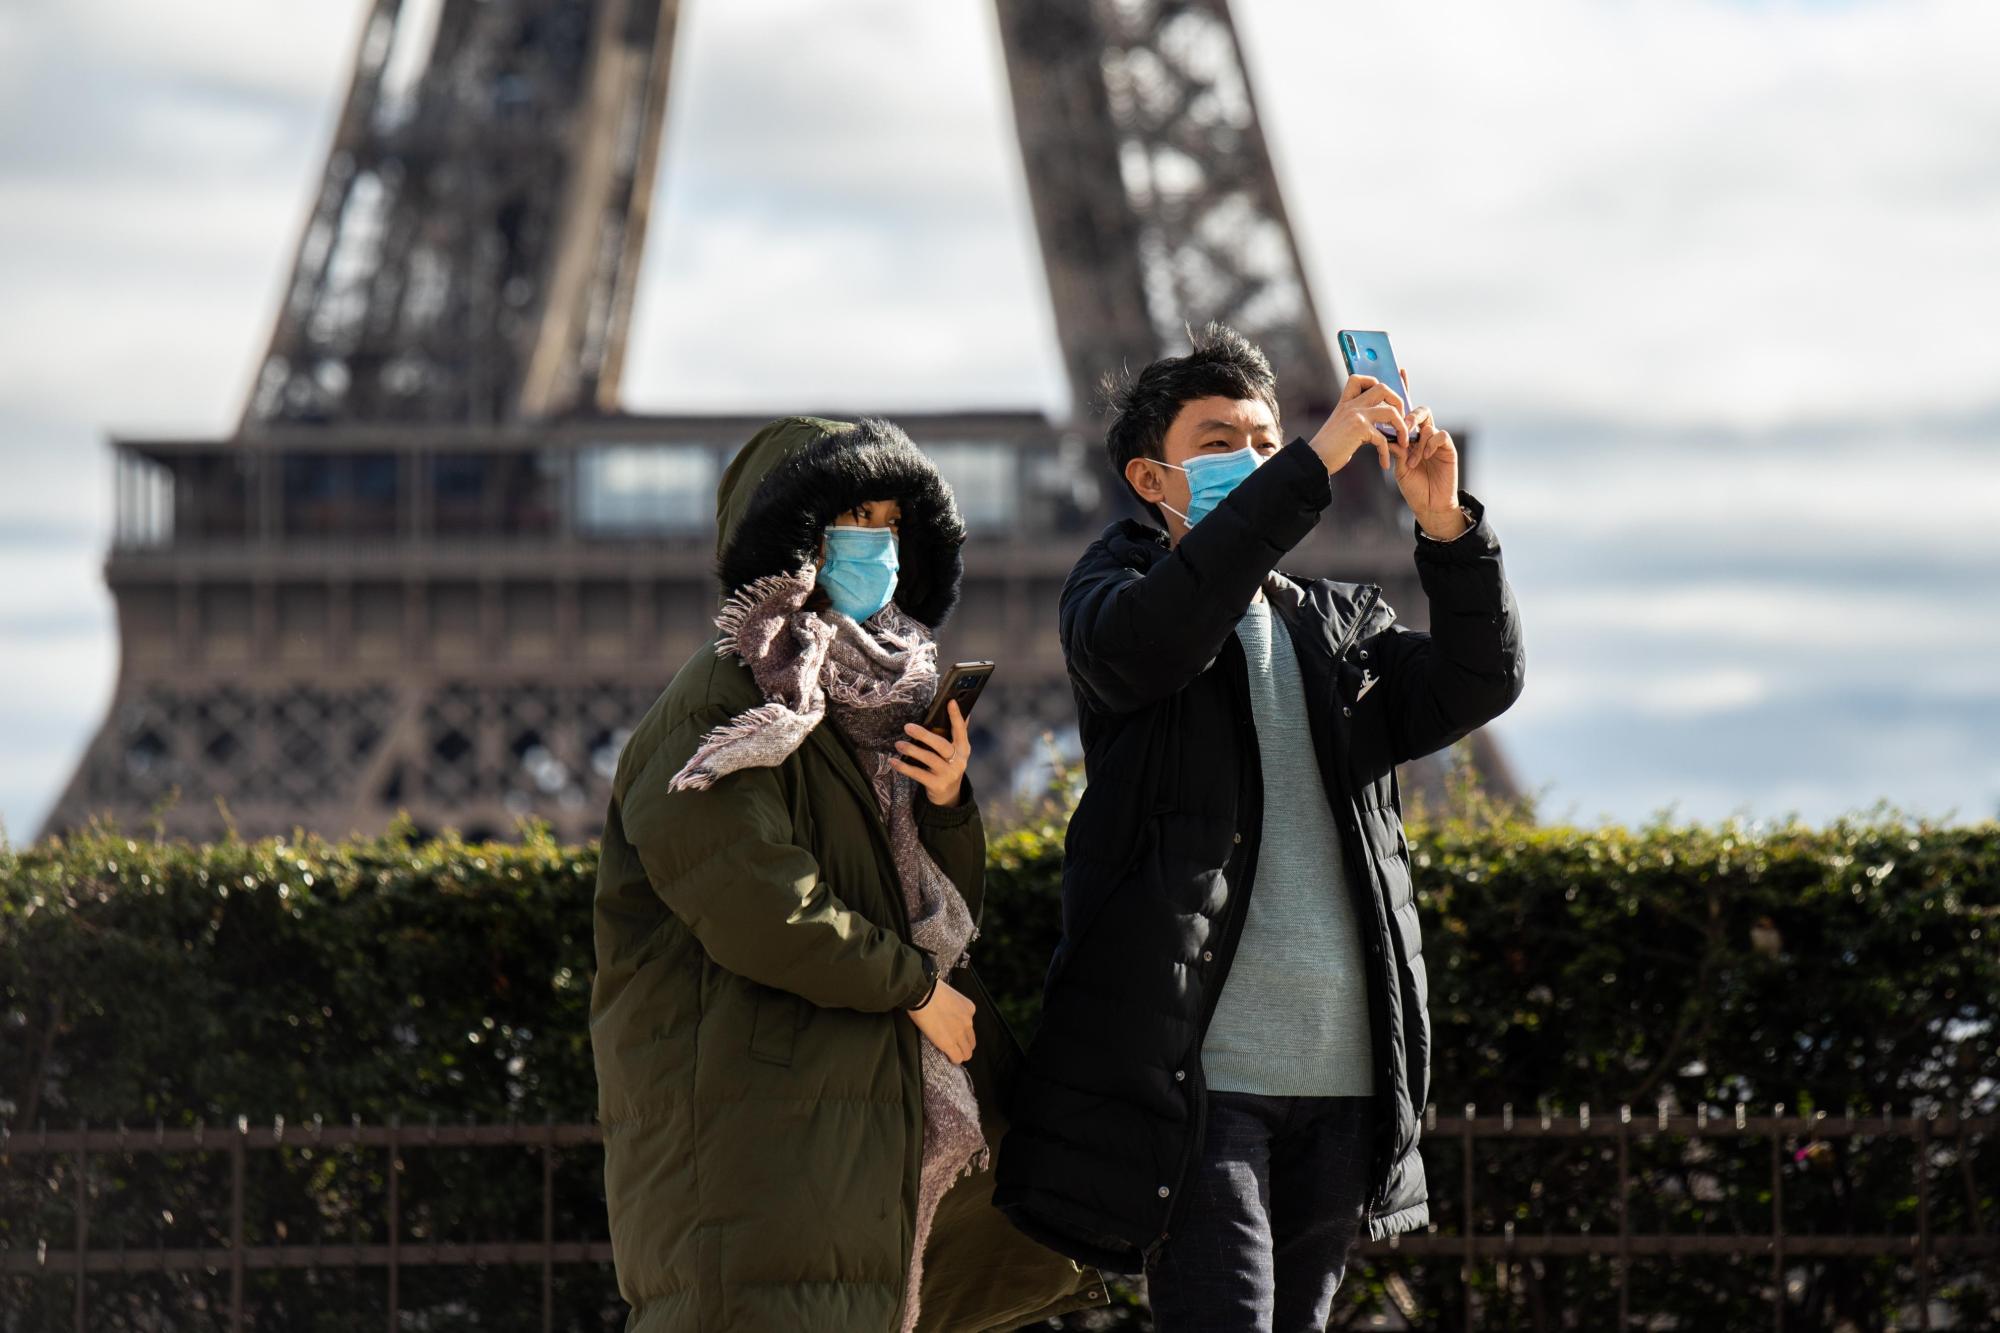 Tourists wearing protective face masks take a photo in front of the Eiffel Tower in Paris. | KYODO